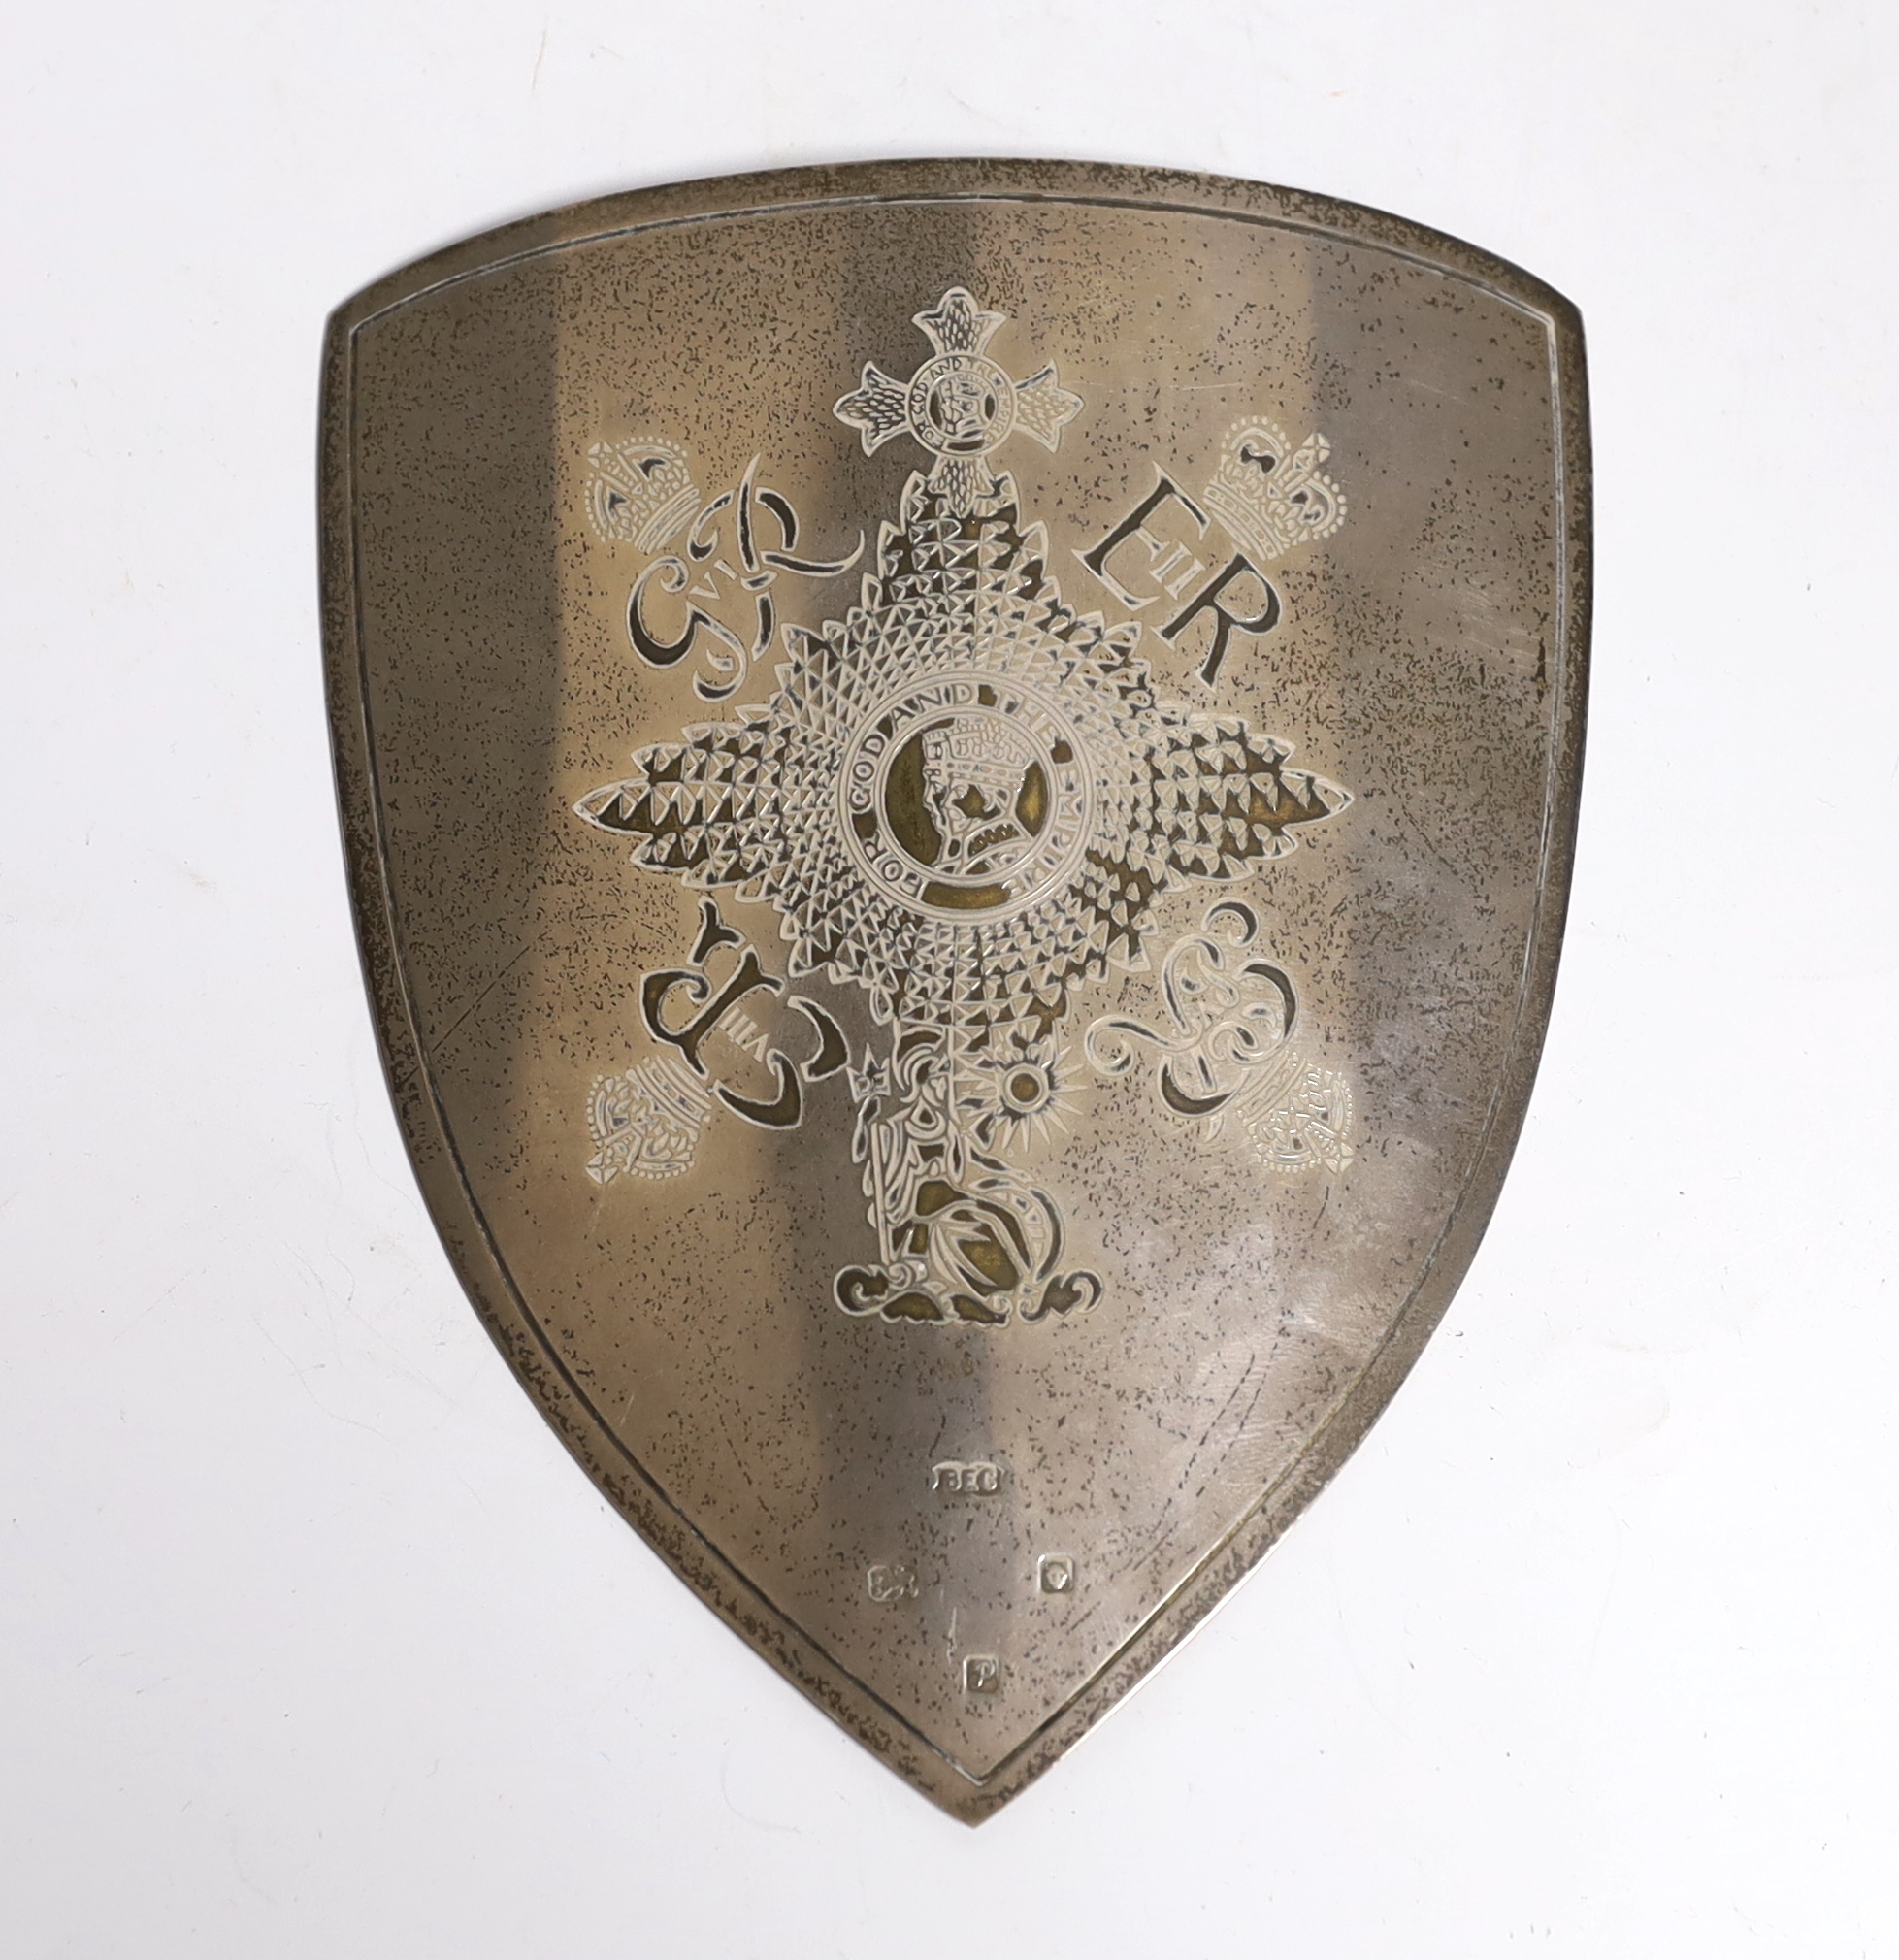 A modern silver shield plaque, engraved 'For God and The Empire. This shield honours membership in The Most Excellent Order of the British Empire and is certified as No. 102 in the register of The British Empire Collecti